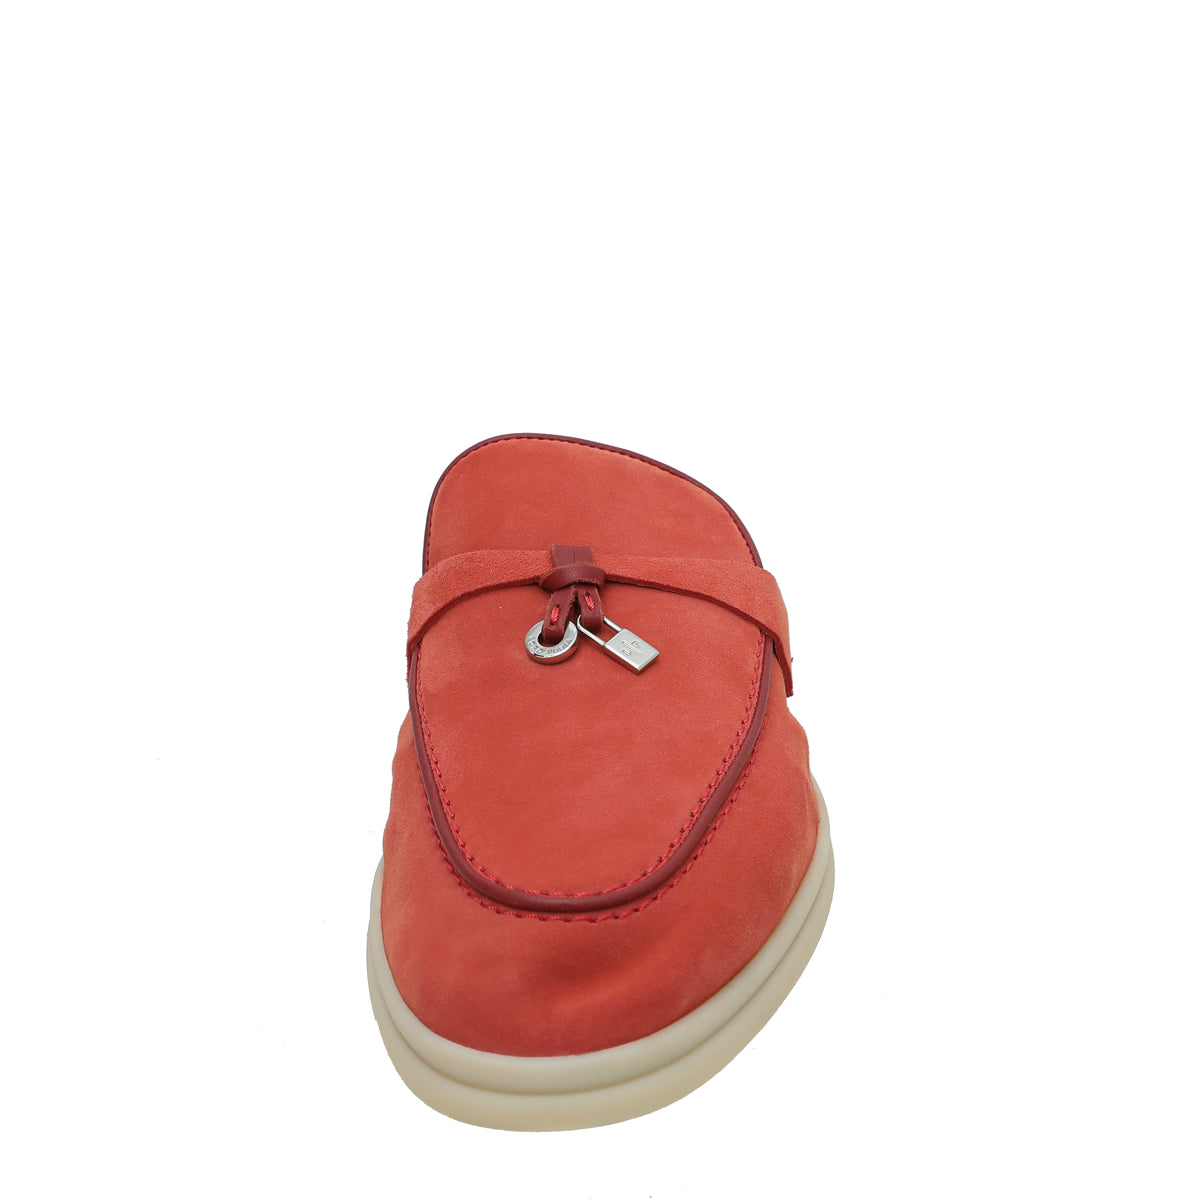 Loro Piana Coral Suede Nautical Charms Walk Babouche Loafers 39